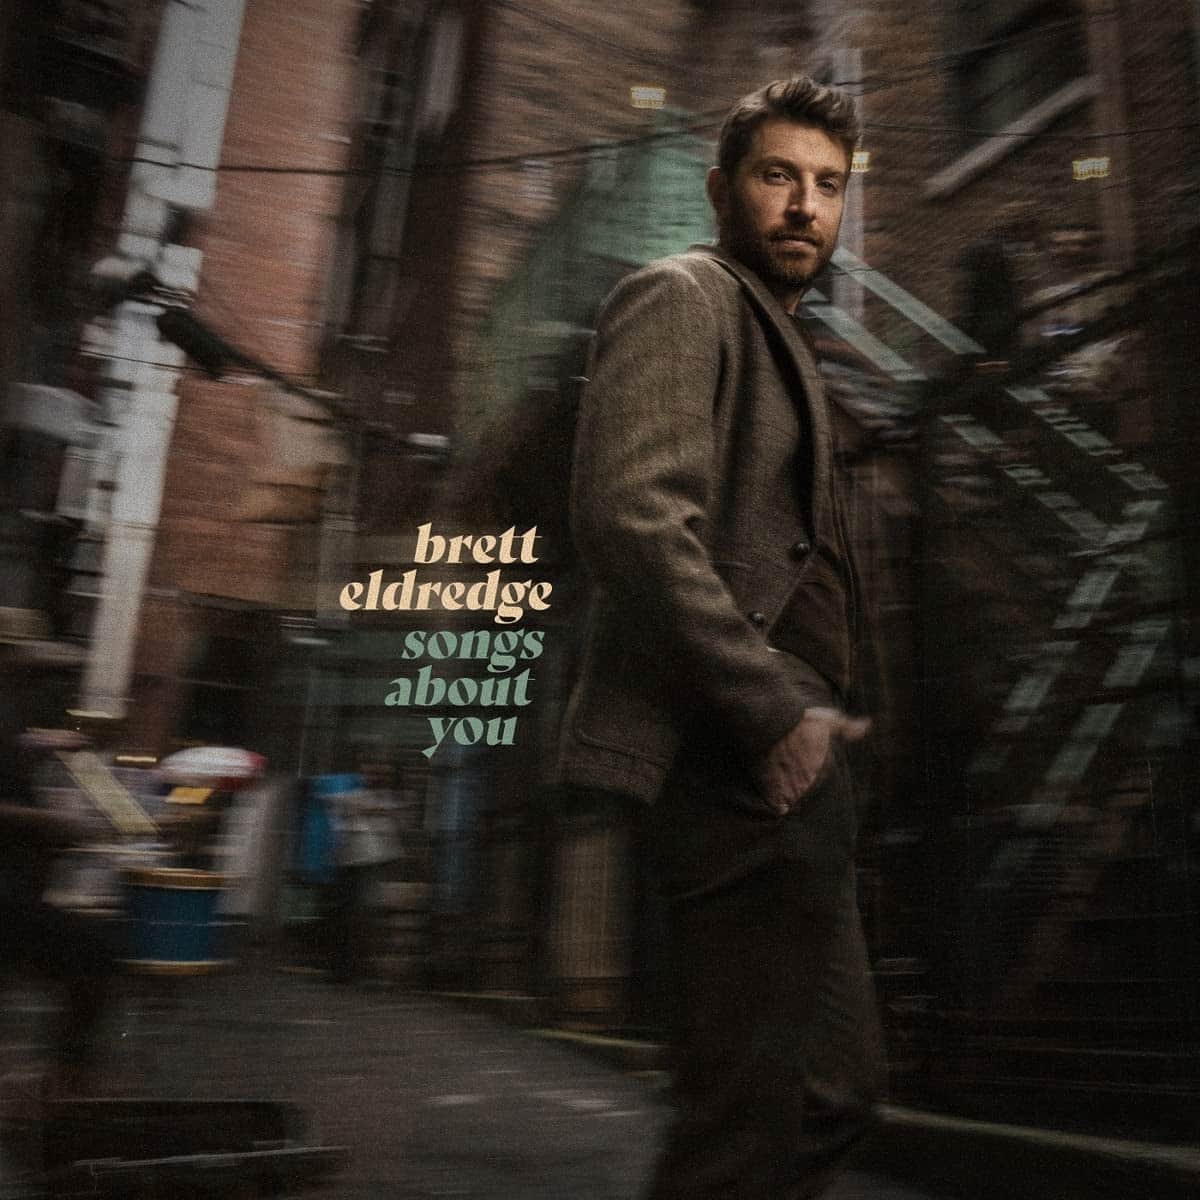 Country Brett Eldredge Album “Songs about You”